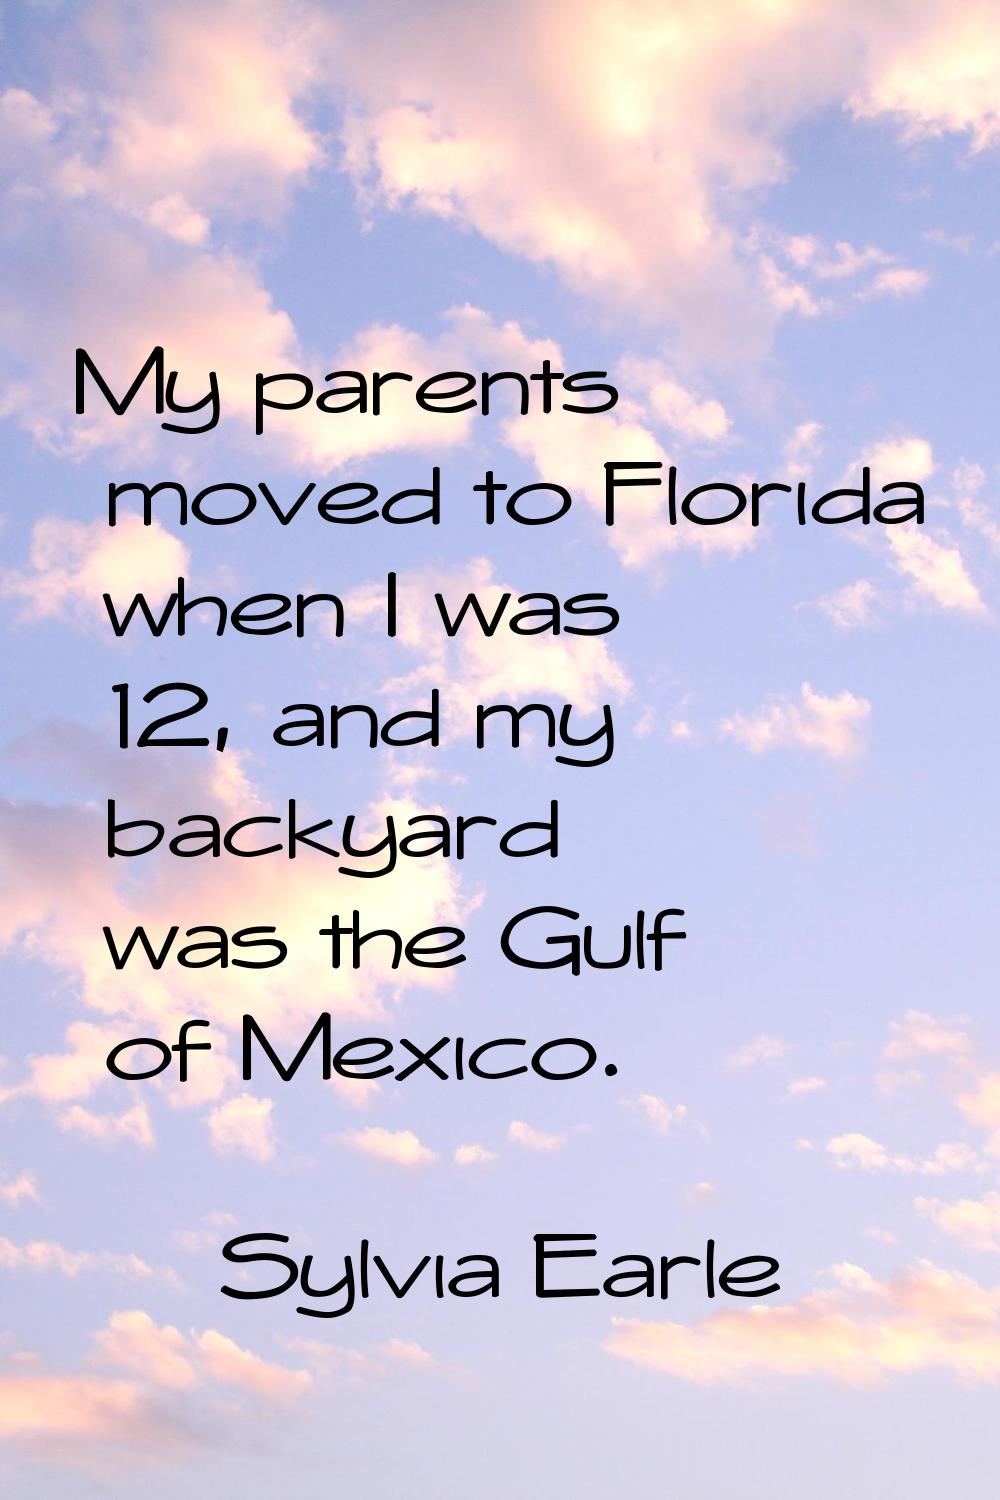 My parents moved to Florida when I was 12, and my backyard was the Gulf of Mexico.